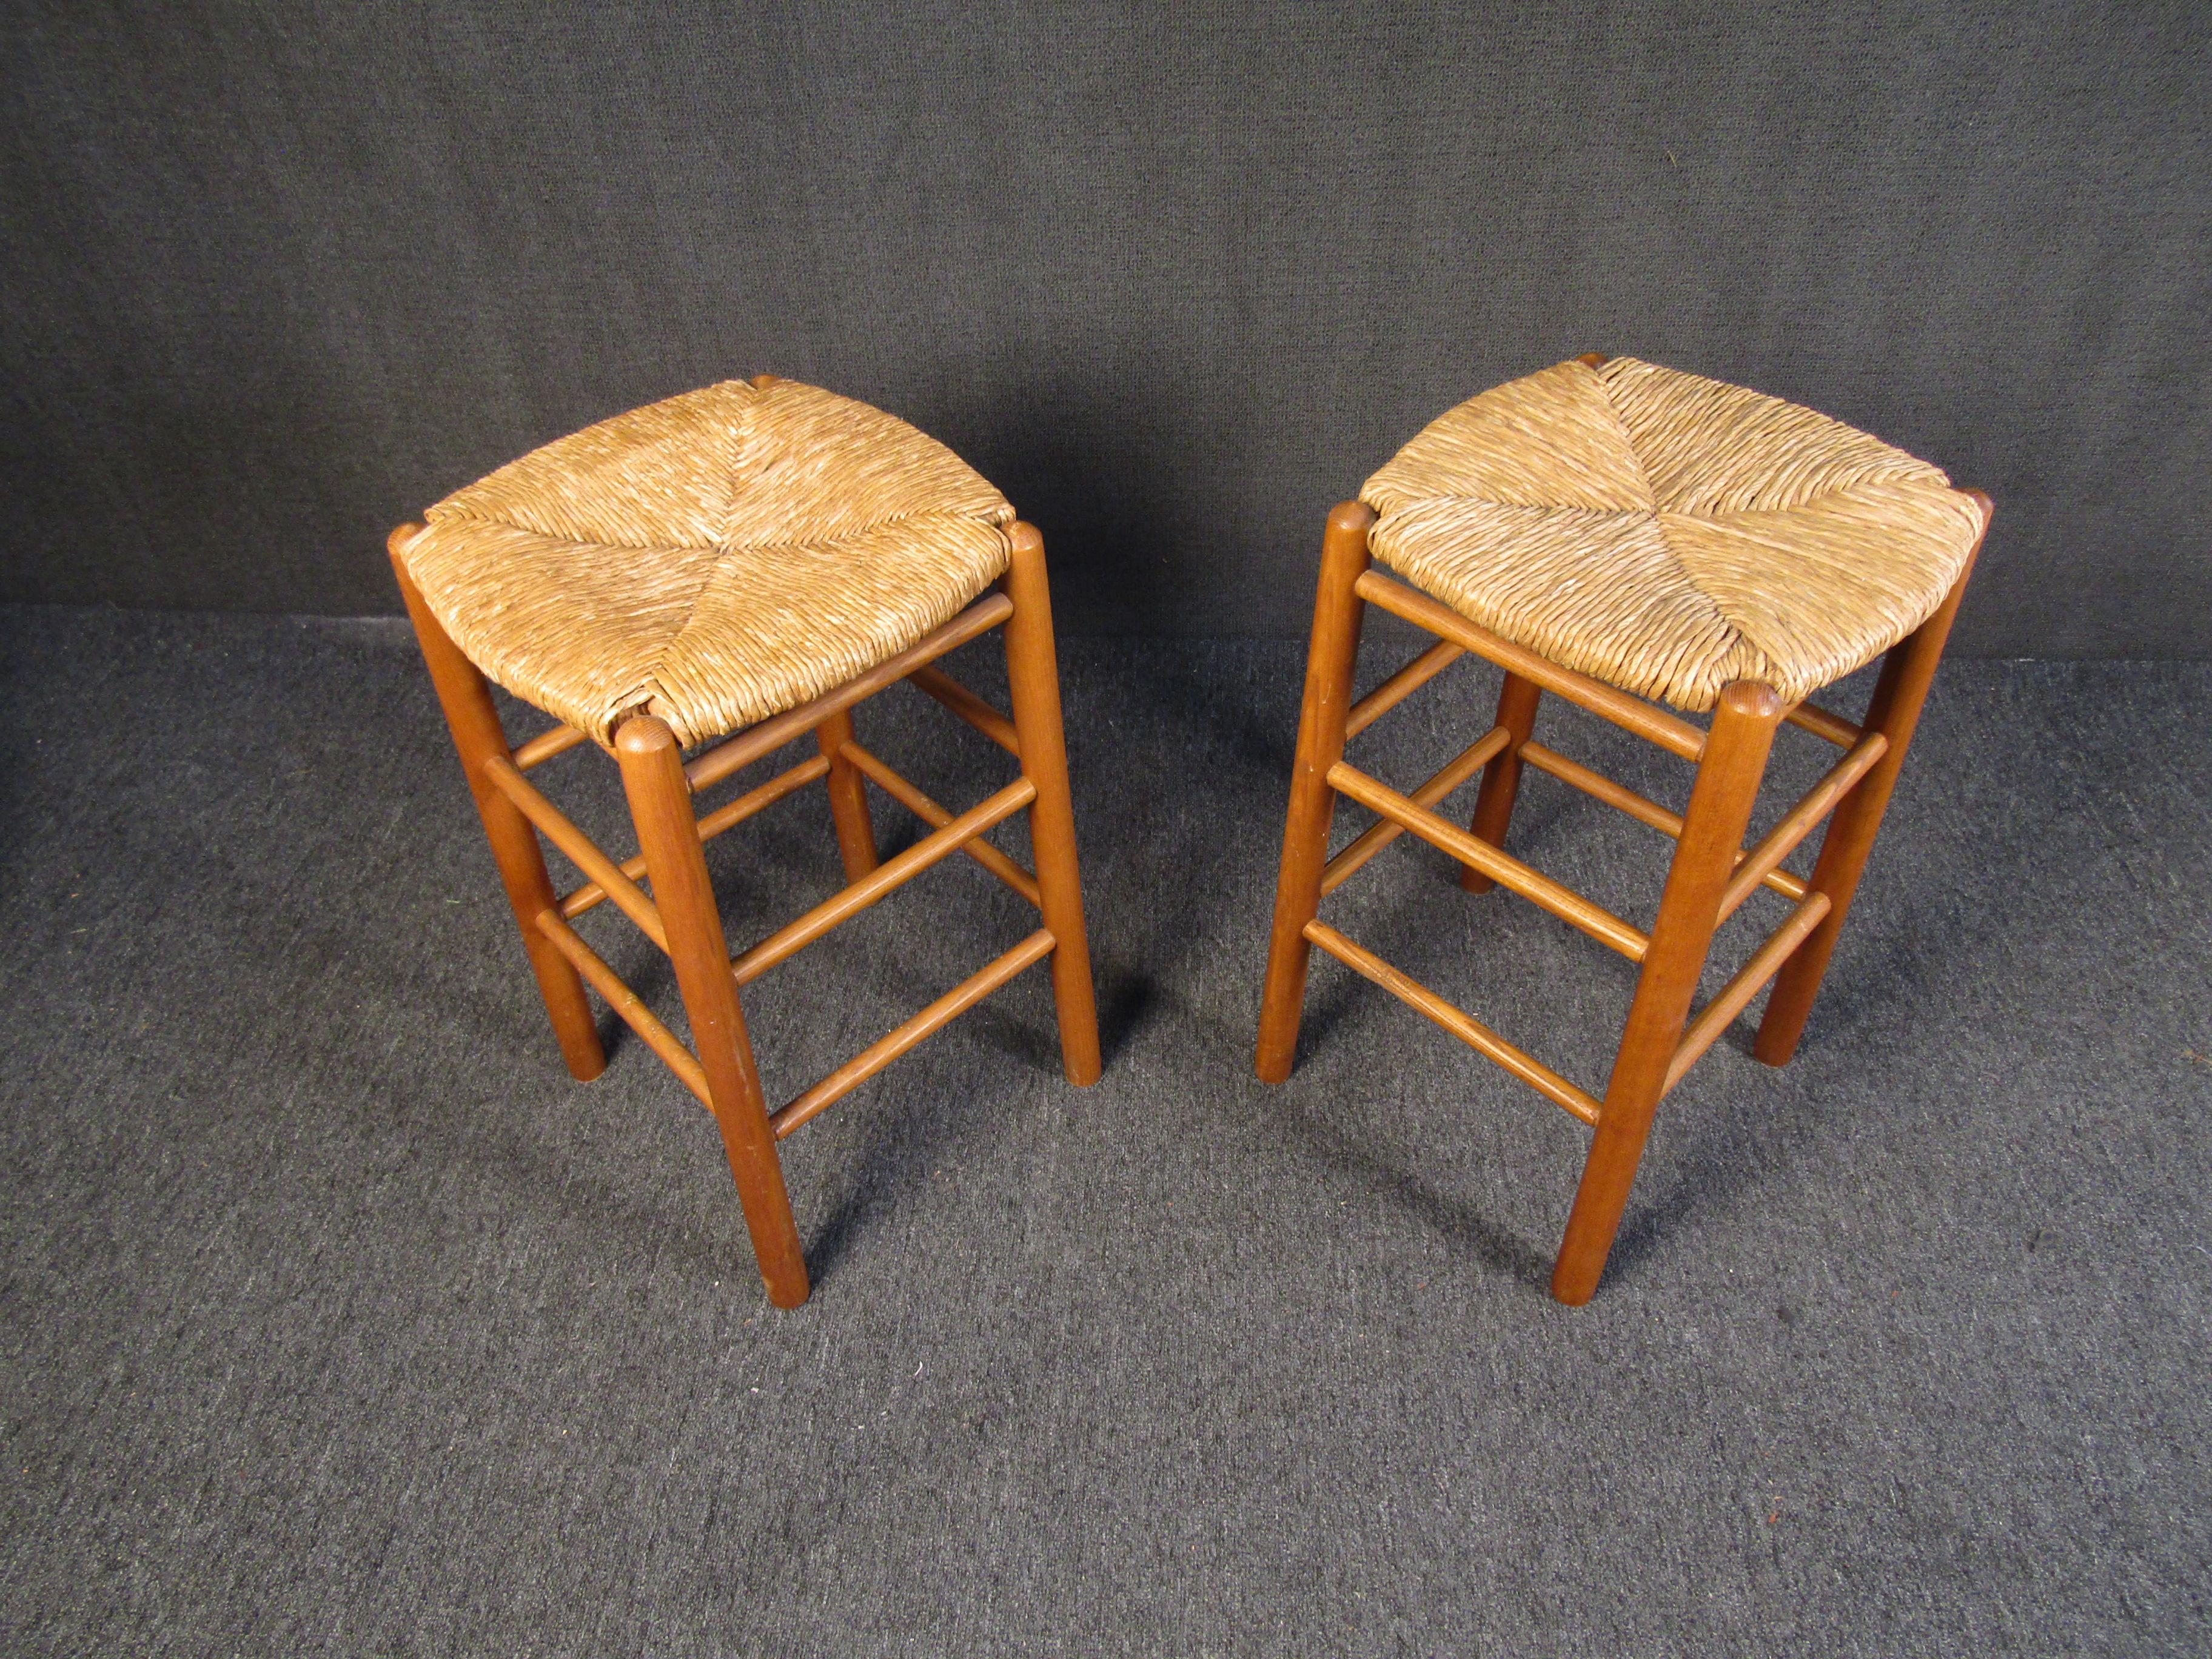 Pair of simple and elegant Mid-Century Modern bar stools combining rich teak frames with woven wicker seats. Please confirm item location with seller (NY/NJ).